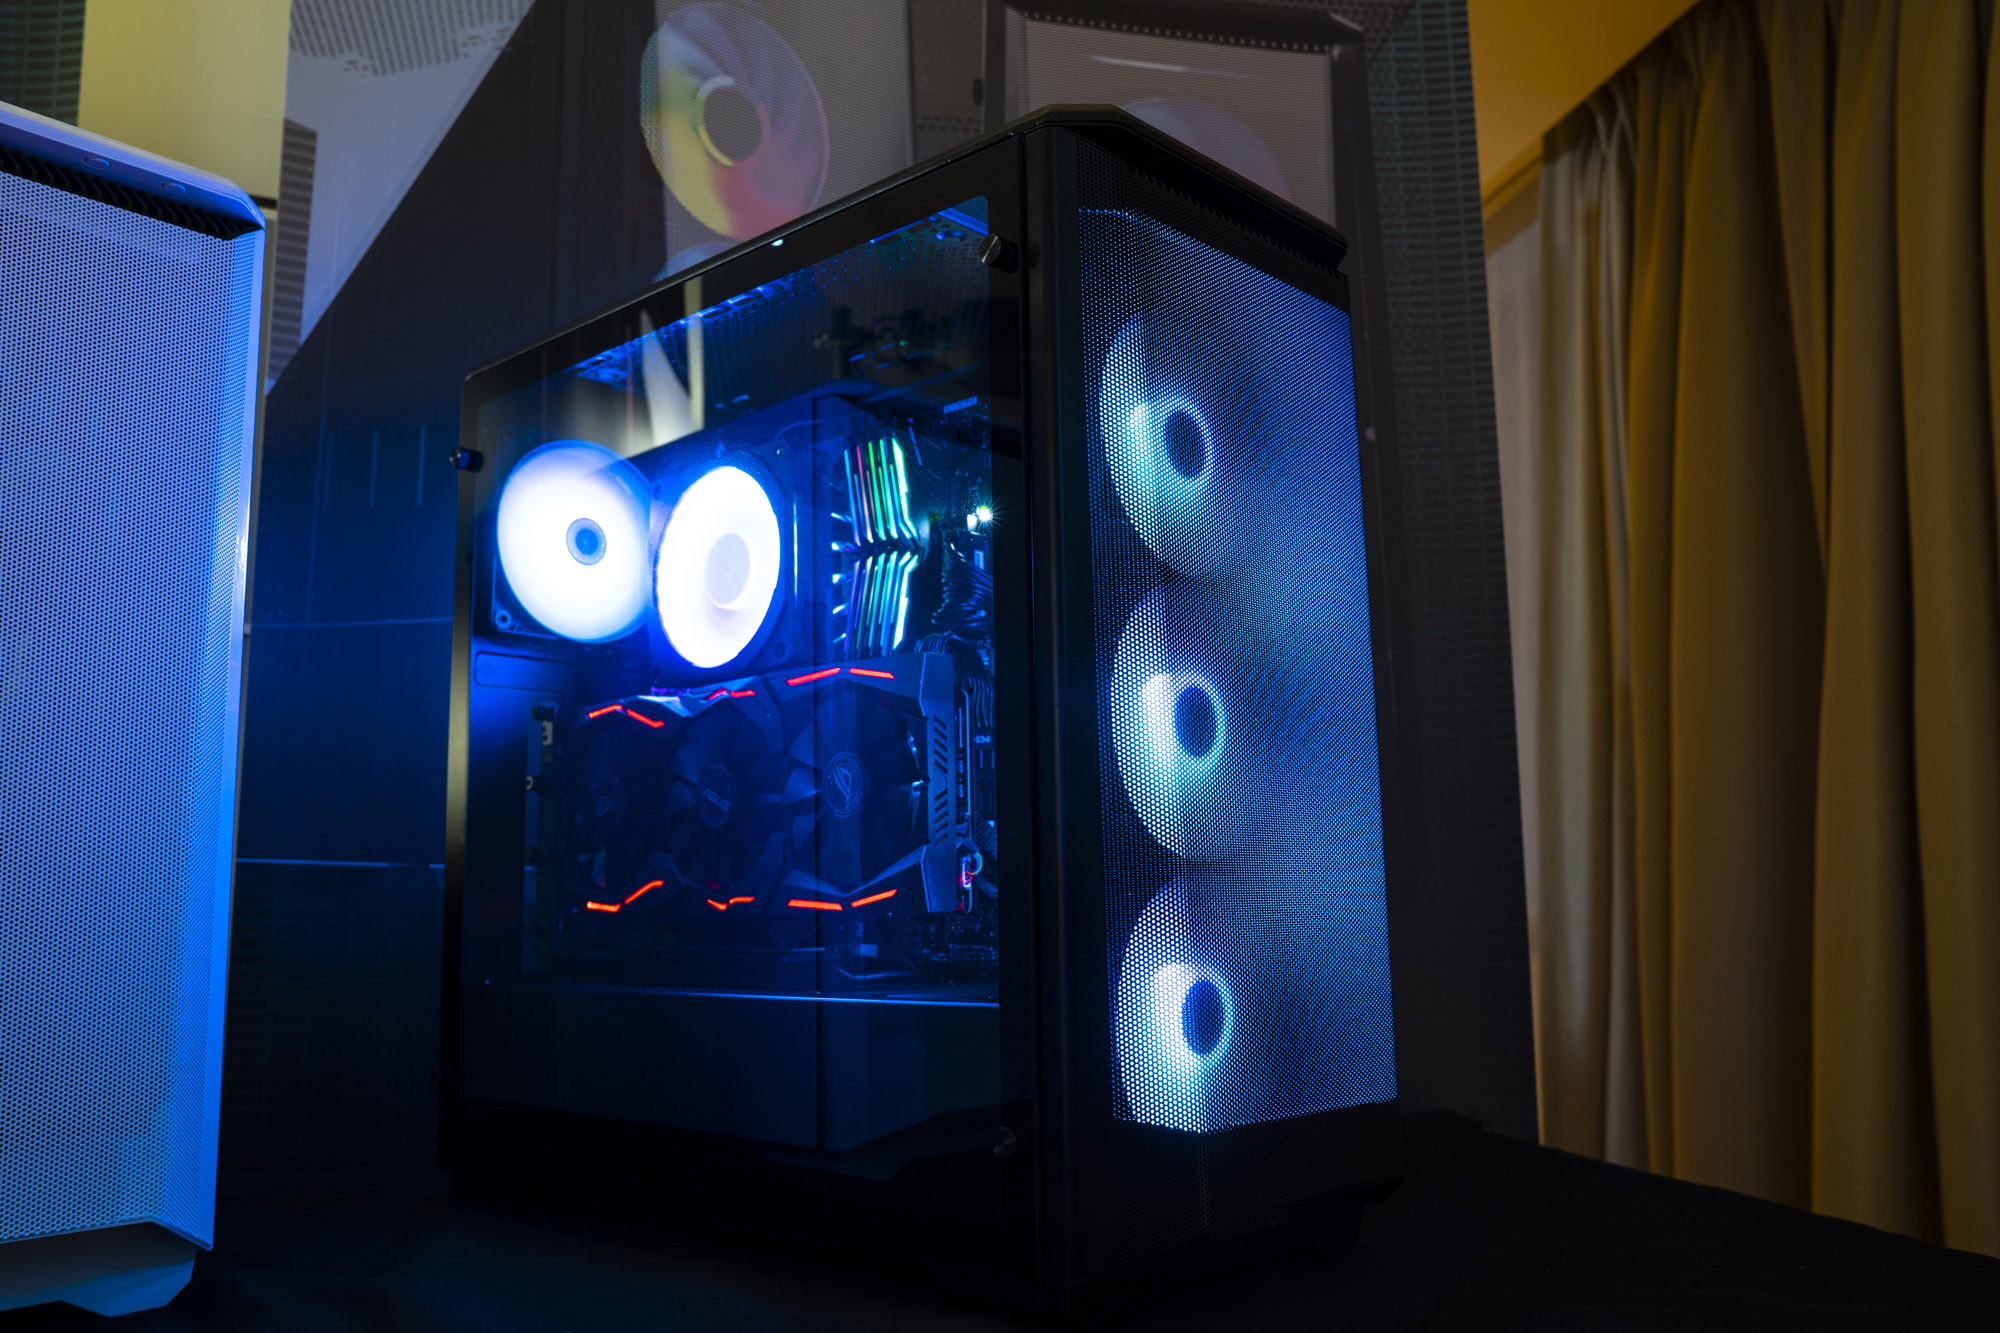 Phanteks shows off Enthoo Luxe 719 and Eclipse